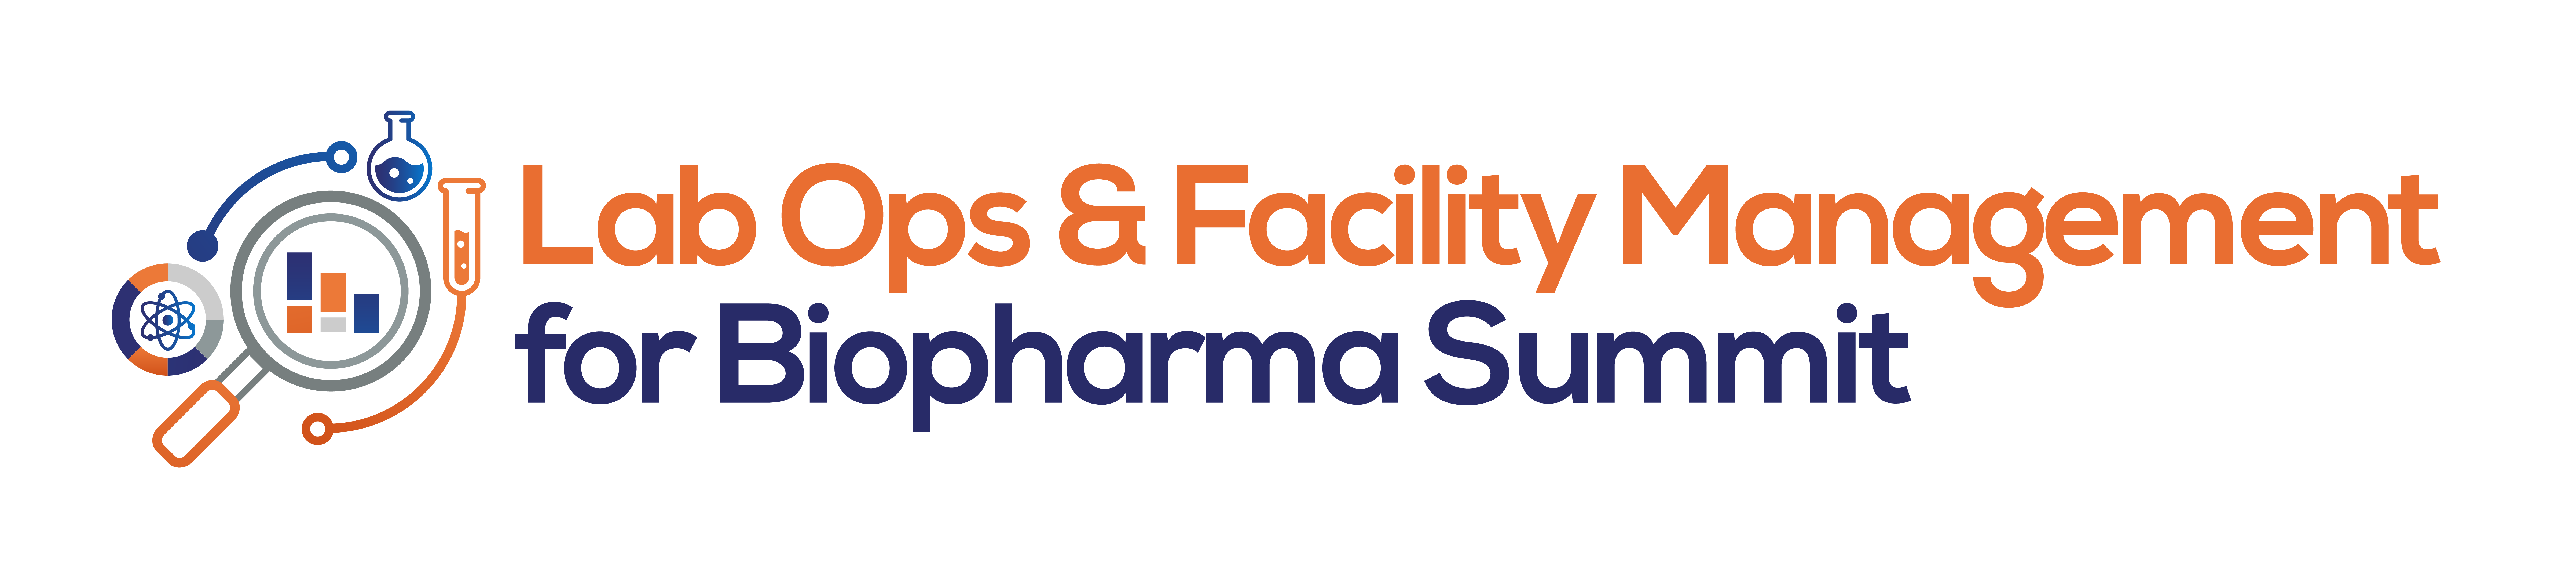 Lab Ops & Facility Management for Biopharma Summit Logo